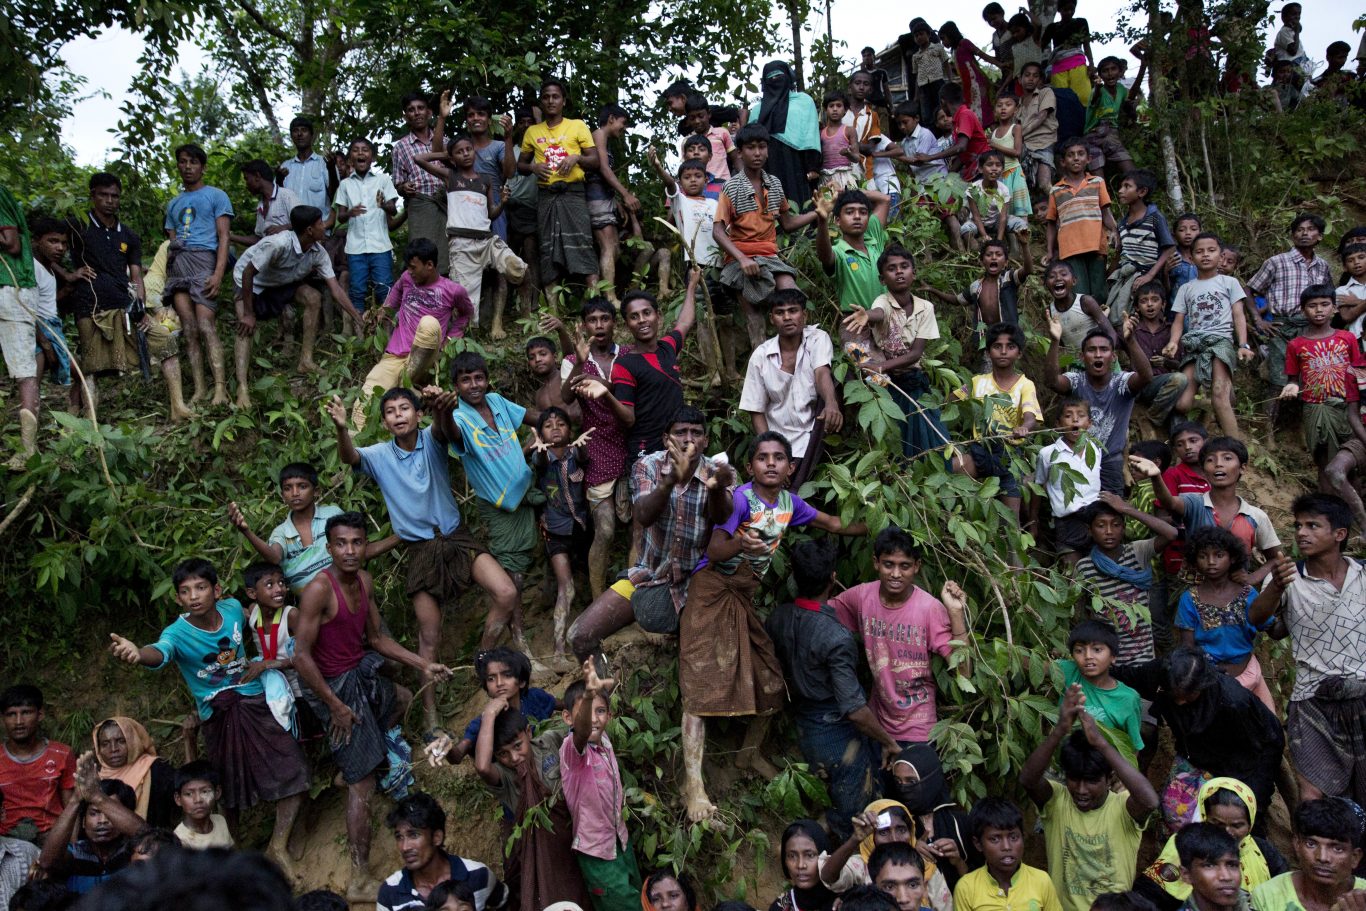 Young Rohingya Muslims stand on a slope before receiving food being distributed near Balukhali refugee camp in Cox's Bazar, Bangladesh (Bernat Armangue/AP)